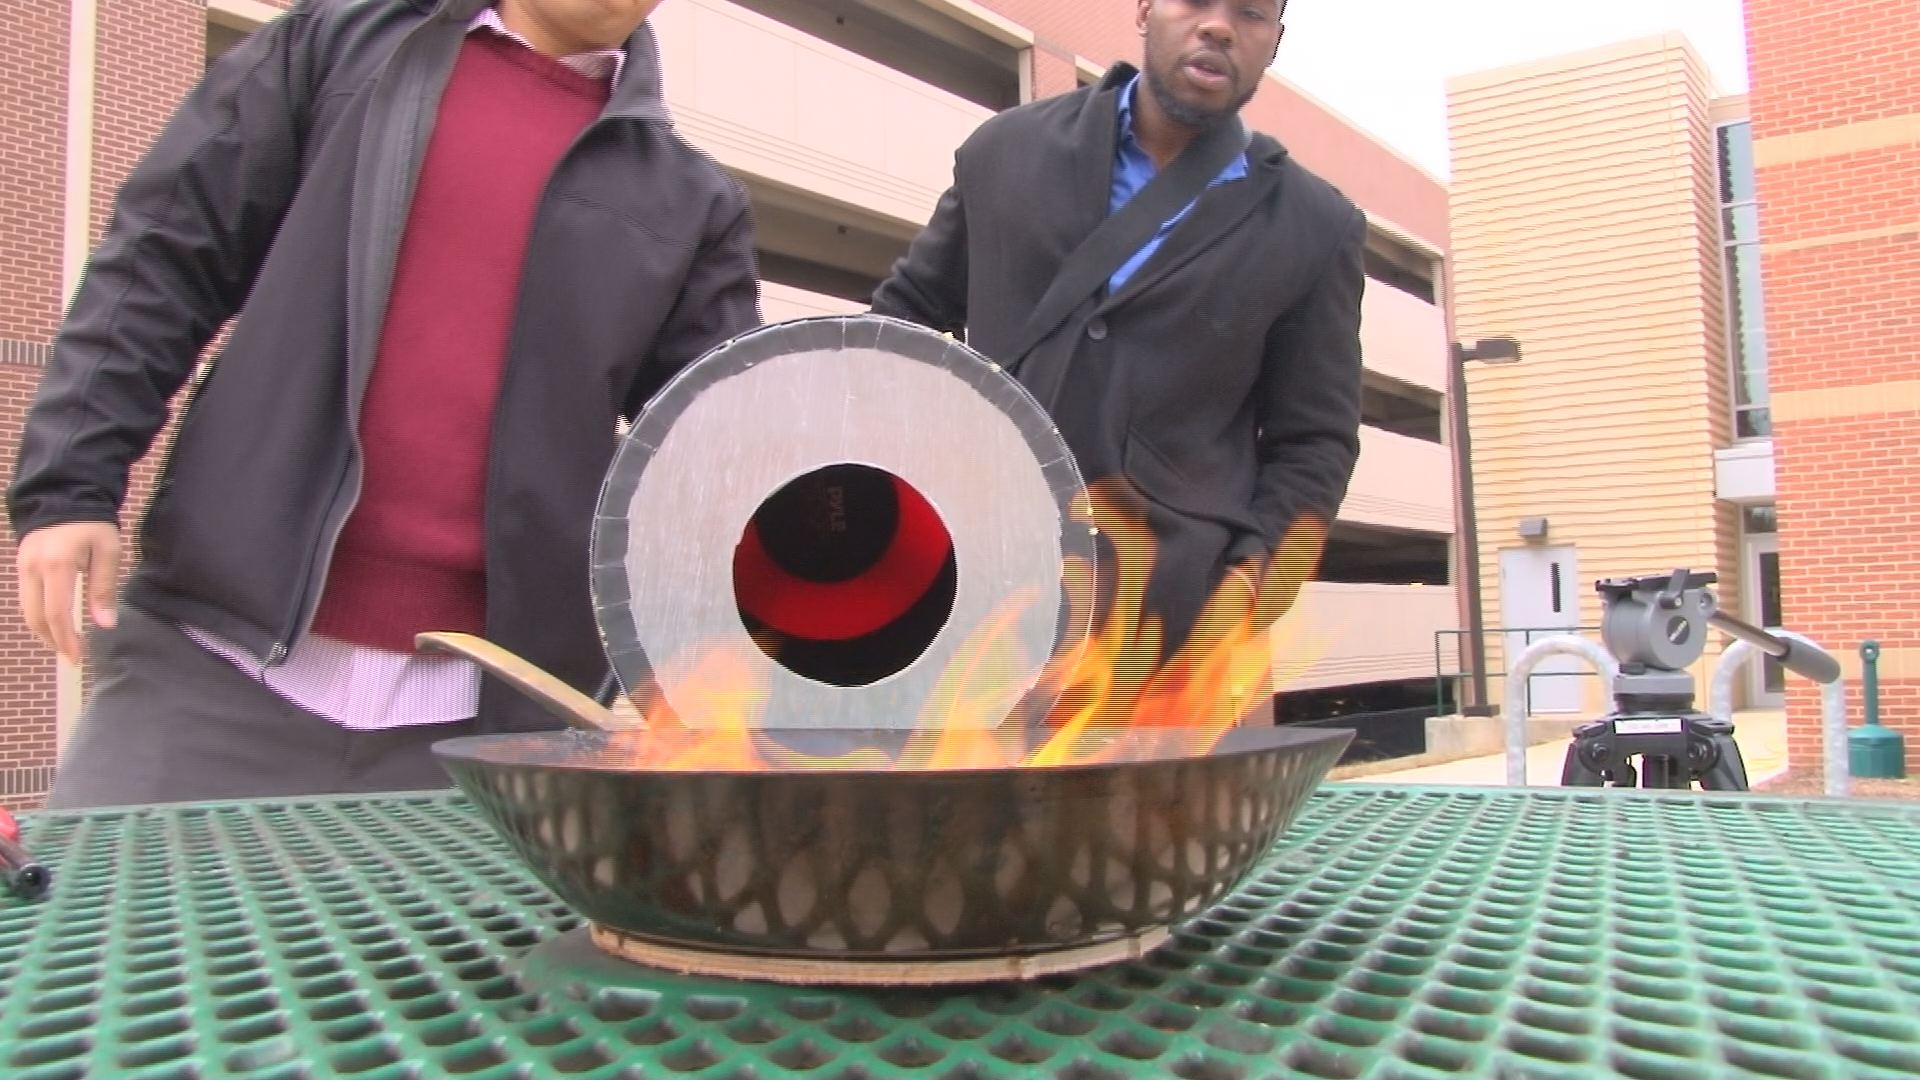 George Mason students Viet Tran and Seth Robertson have created a device that uses sound to extinguish fires.